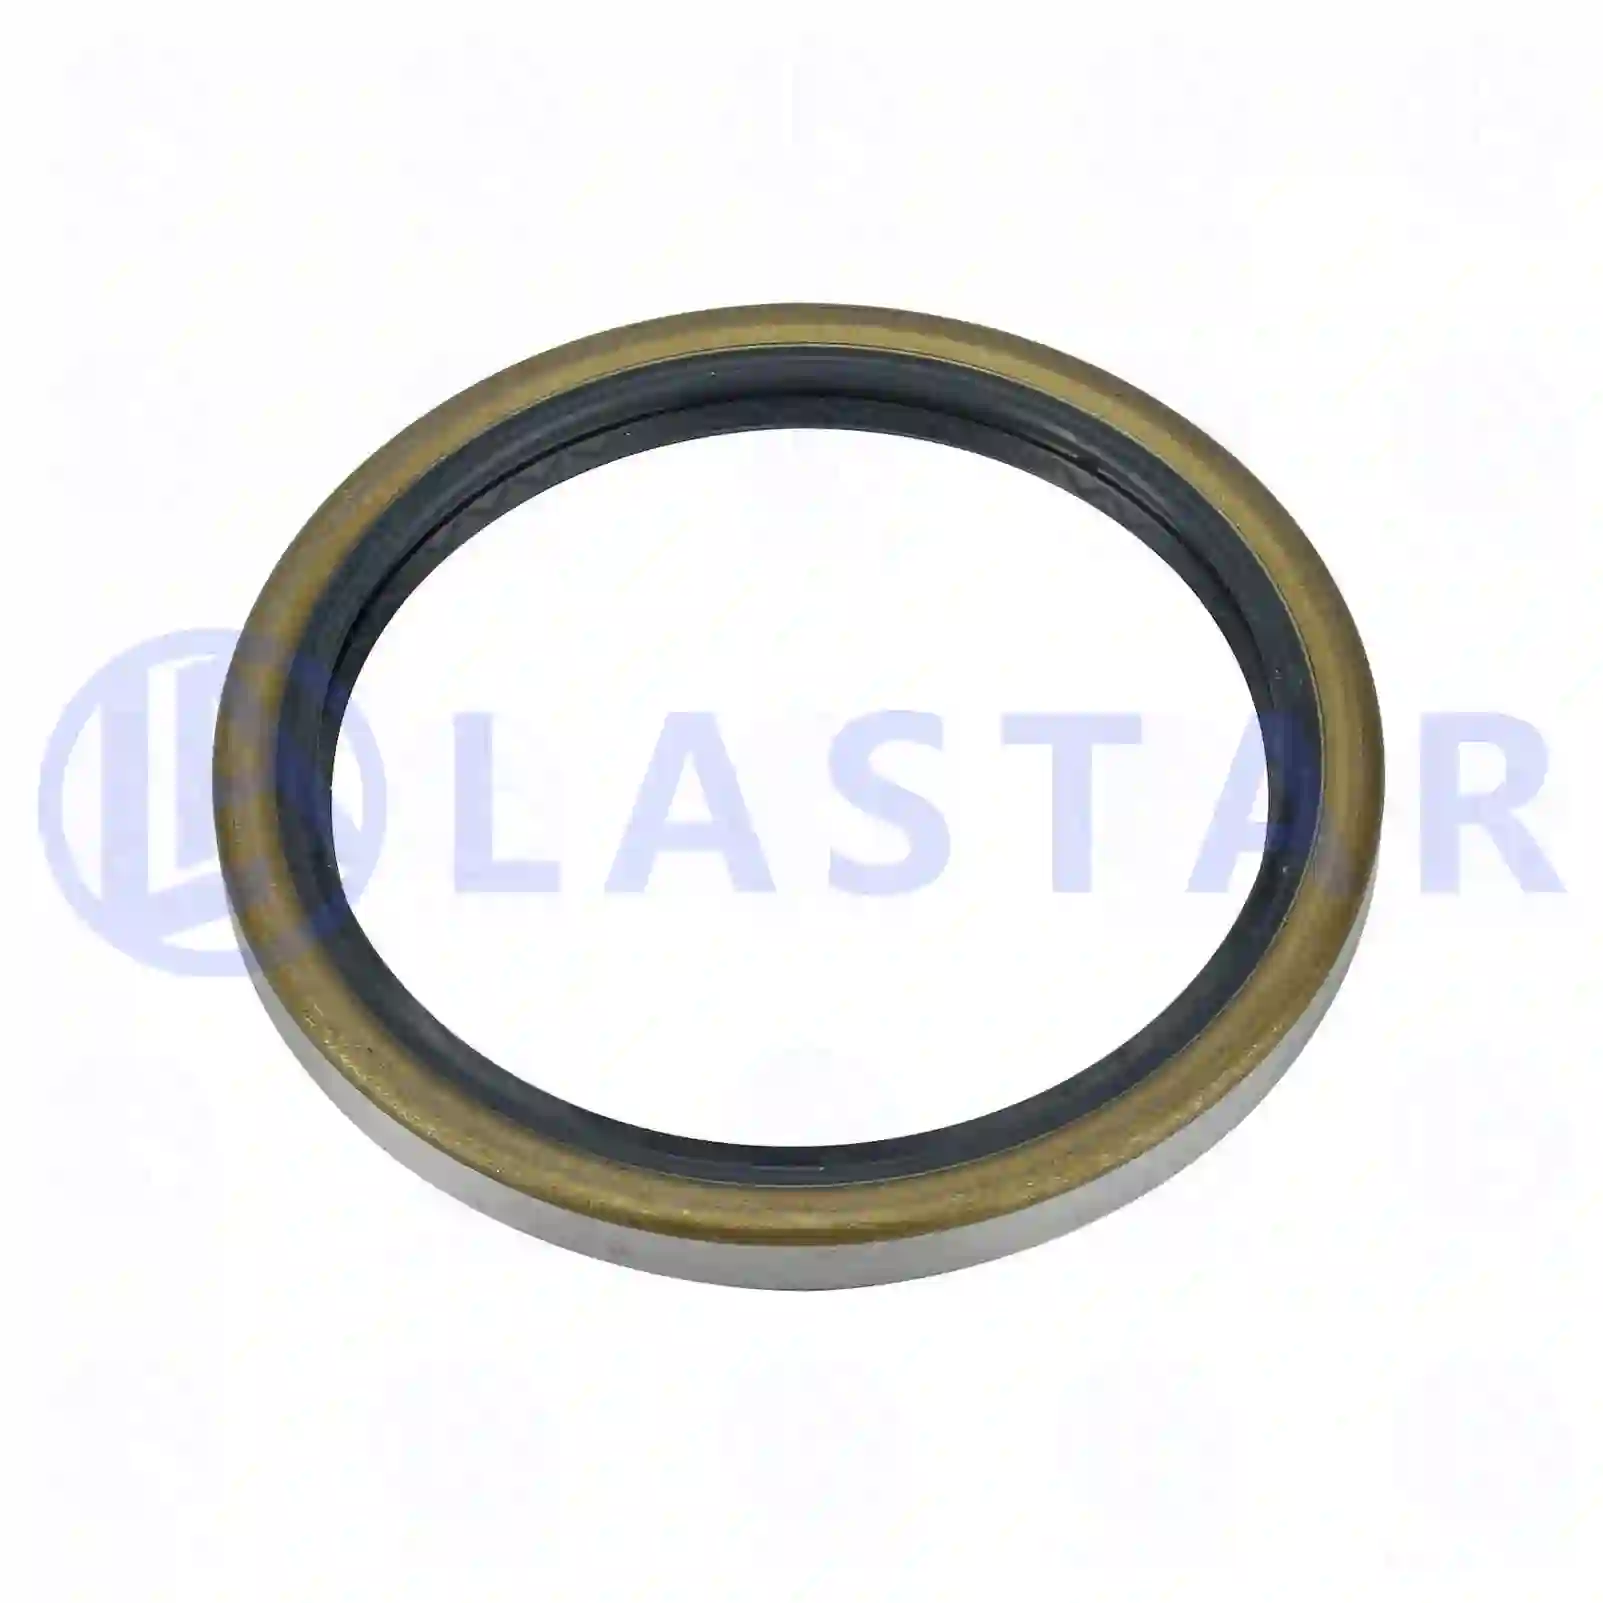 Oil seal, 77734112, 378480, , , ||  77734112 Lastar Spare Part | Truck Spare Parts, Auotomotive Spare Parts Oil seal, 77734112, 378480, , , ||  77734112 Lastar Spare Part | Truck Spare Parts, Auotomotive Spare Parts